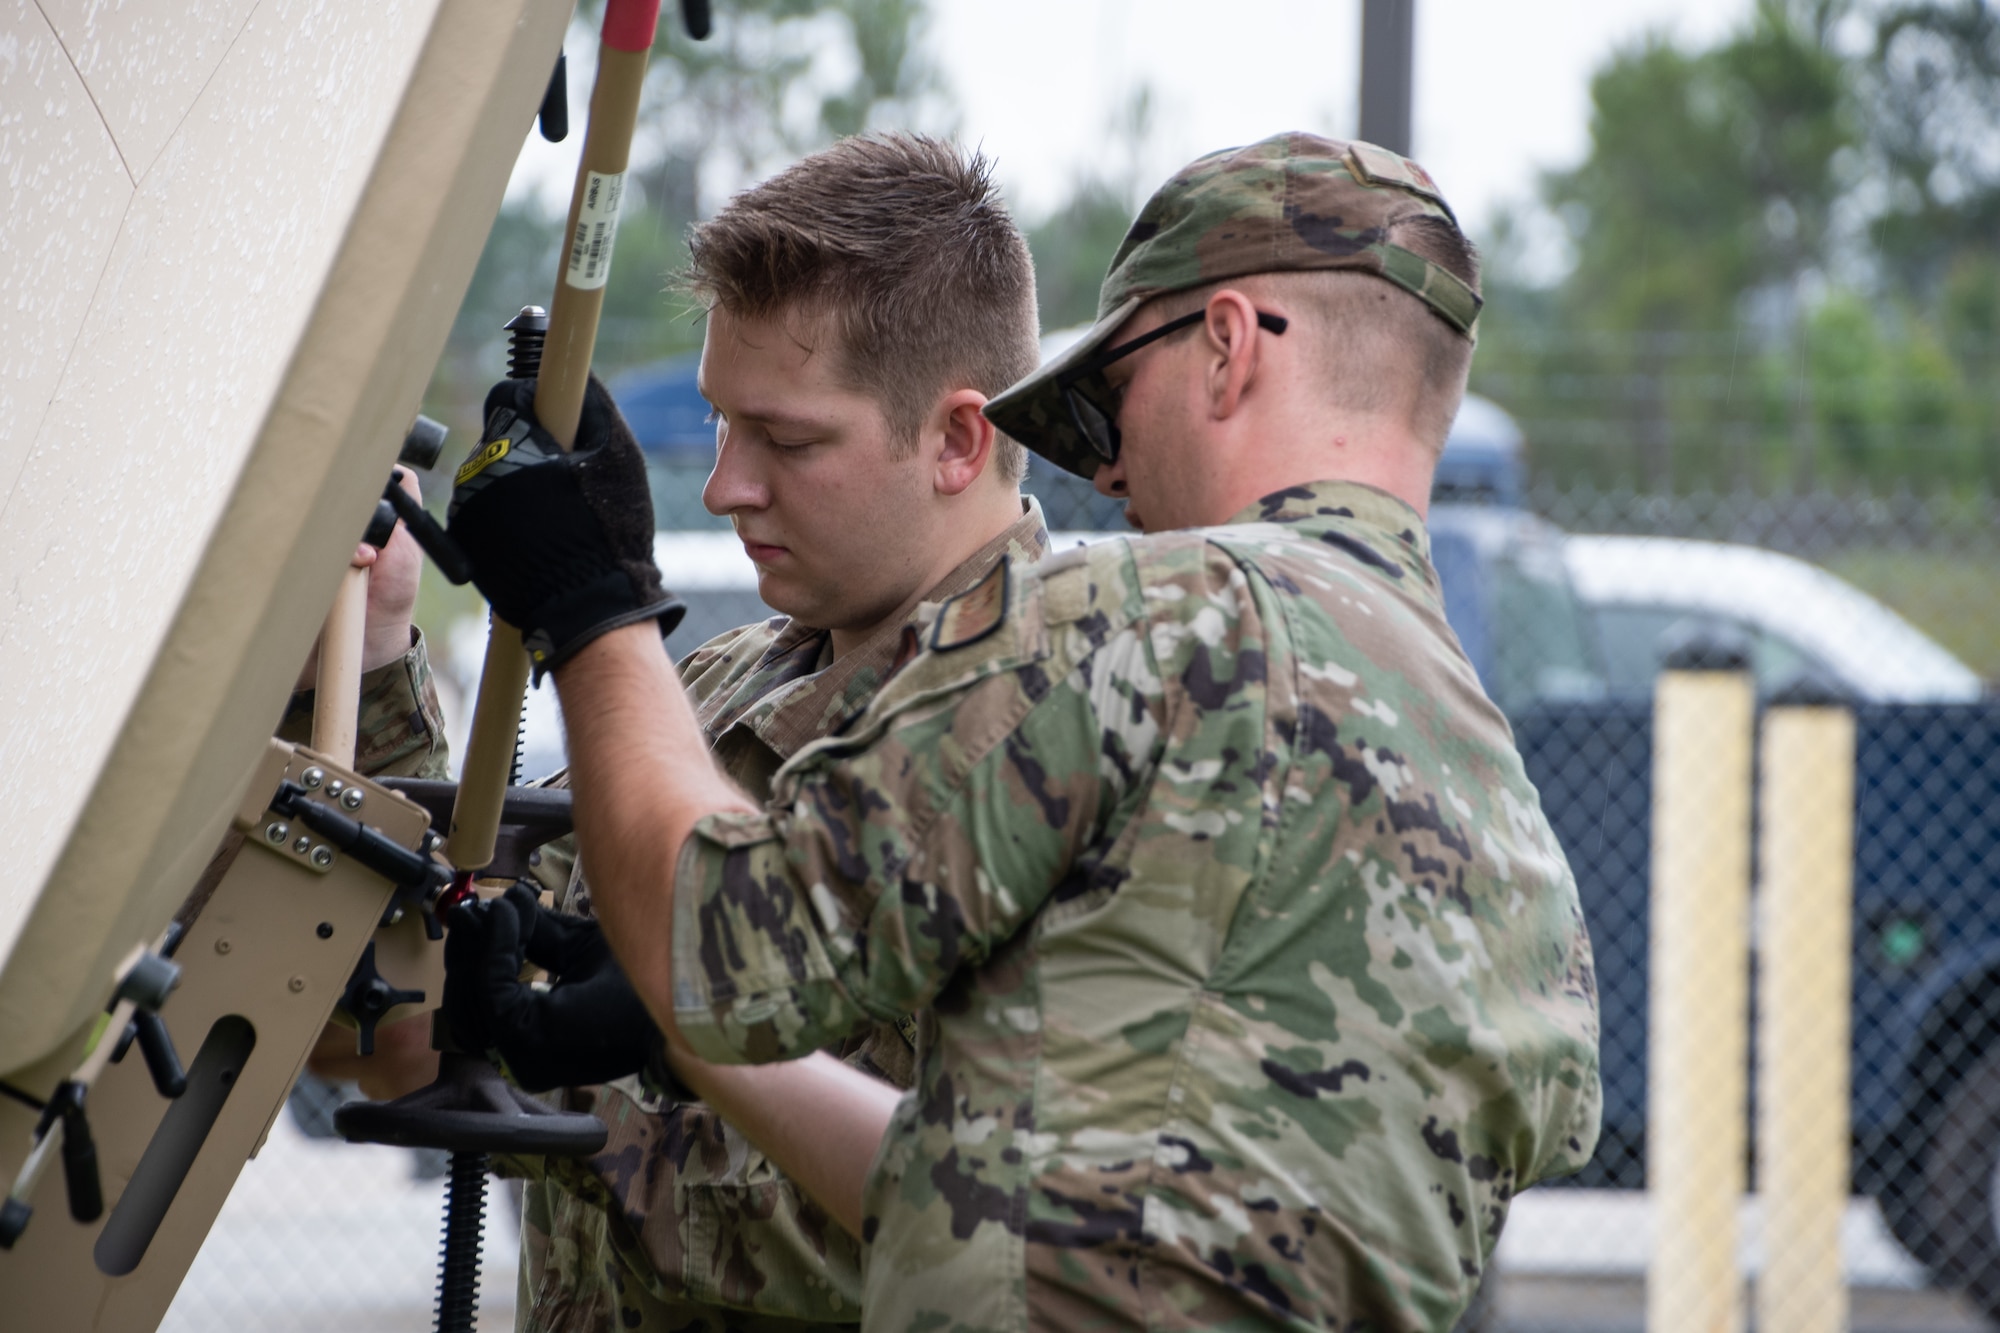 Members of the 239th Combat Communications Squadron ready a satellite communications antenna for use during Exercise BUMBU 22 at Camp Shelby, Miss., June 3, 2022. BUMBU 22 brings five combat communications squadrons with the 254th Combat Communications Group from their home stations located across the nation together for a consolidated training exercise. (U.S. Air National Guard photo by Airman 1st Class Kelly Ferguson)